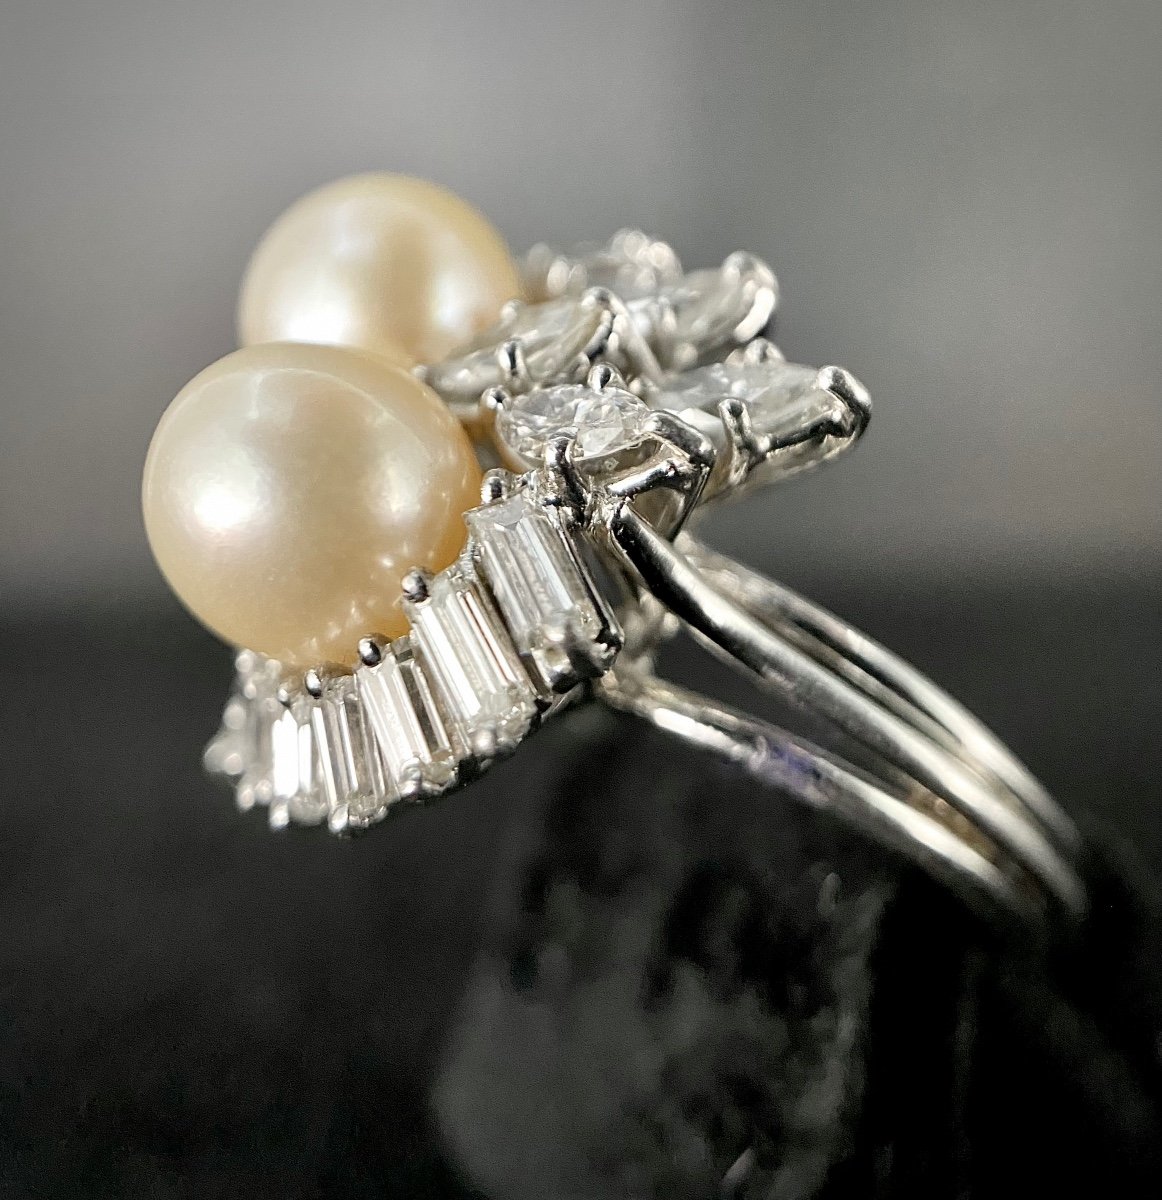 Ring In White Gold Set With 2 Pearls Surrounded By 22 Diamonds: 3.50 Carats-photo-4